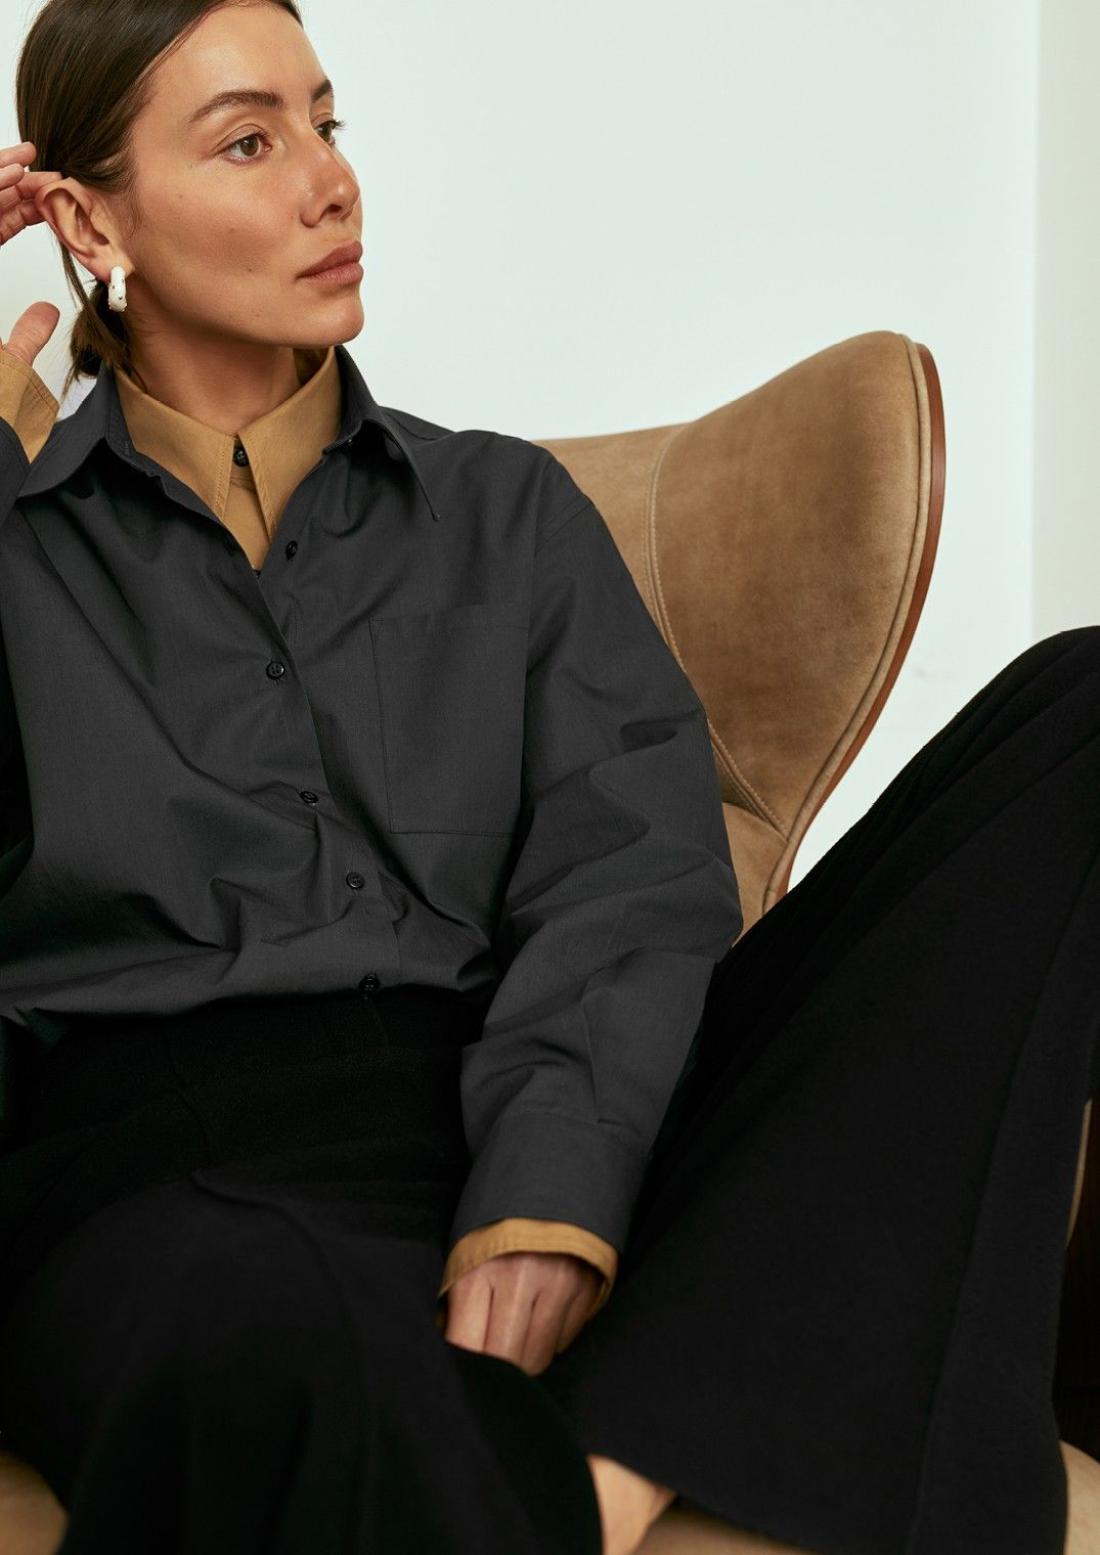 Minimal Fashion Julie Pelipas wears Bettter Reworked Black and Caramel Shirts and Black Pants